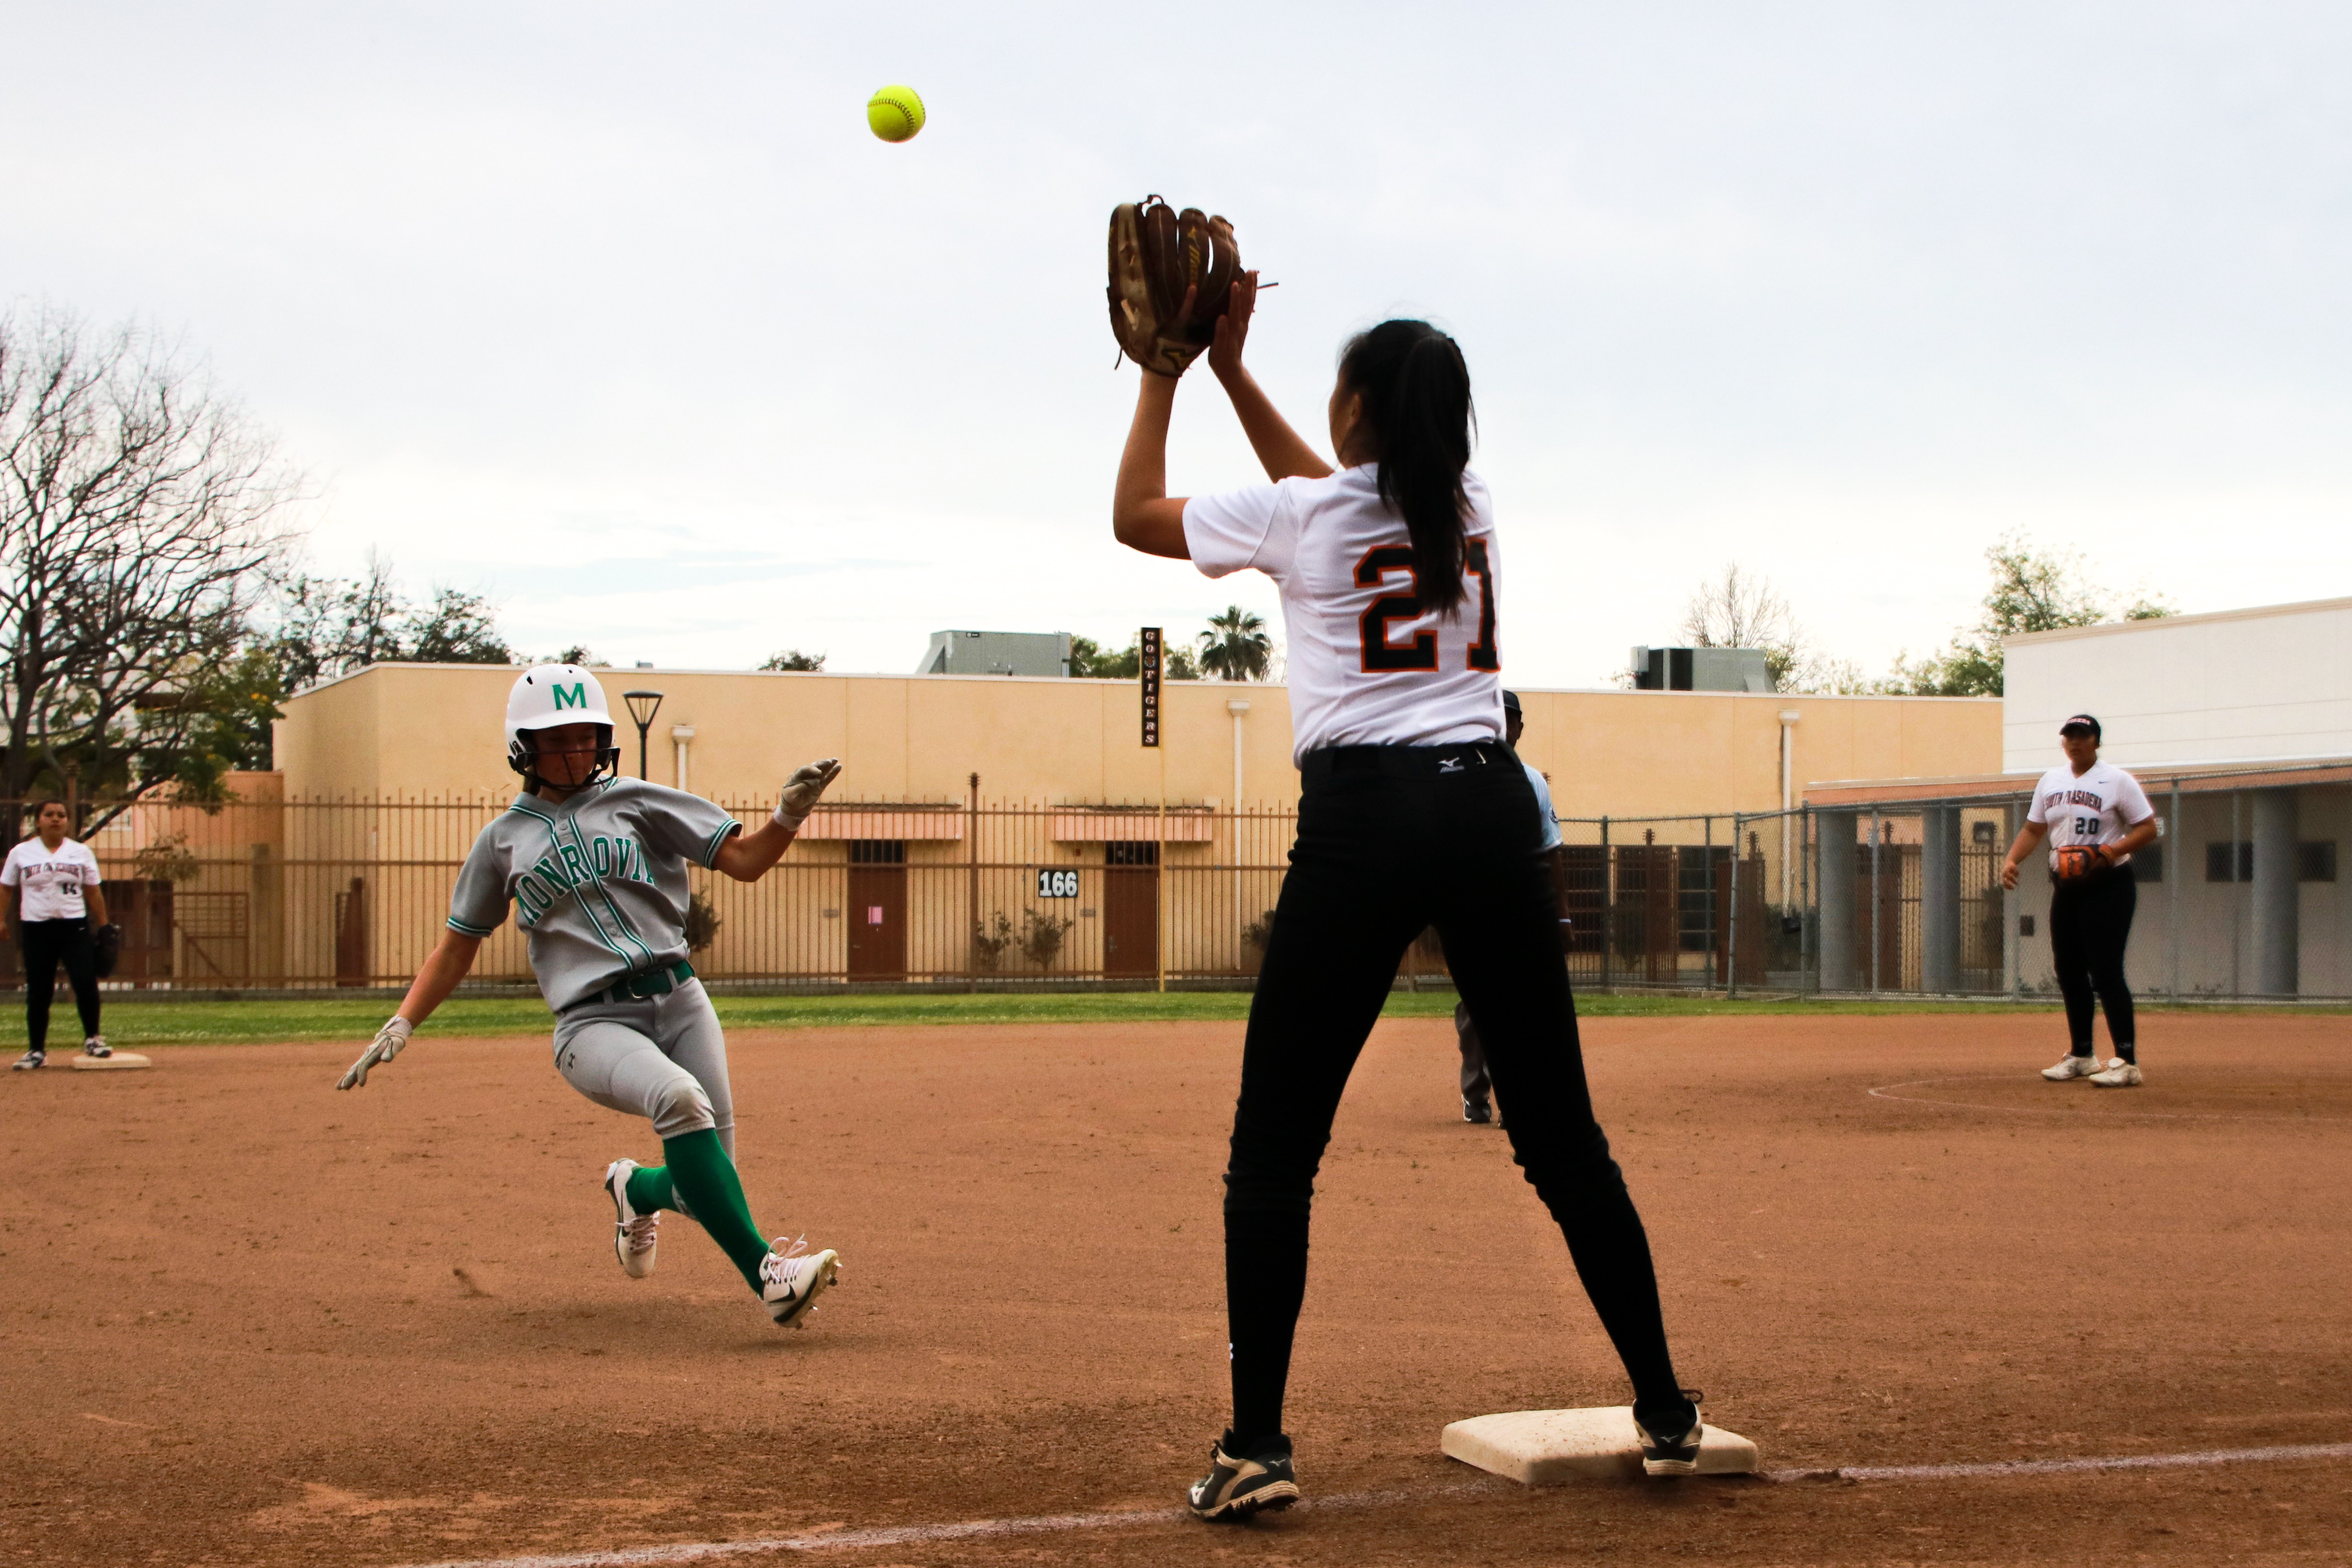 Thumbnail for Softball falters late in loss to Monrovia